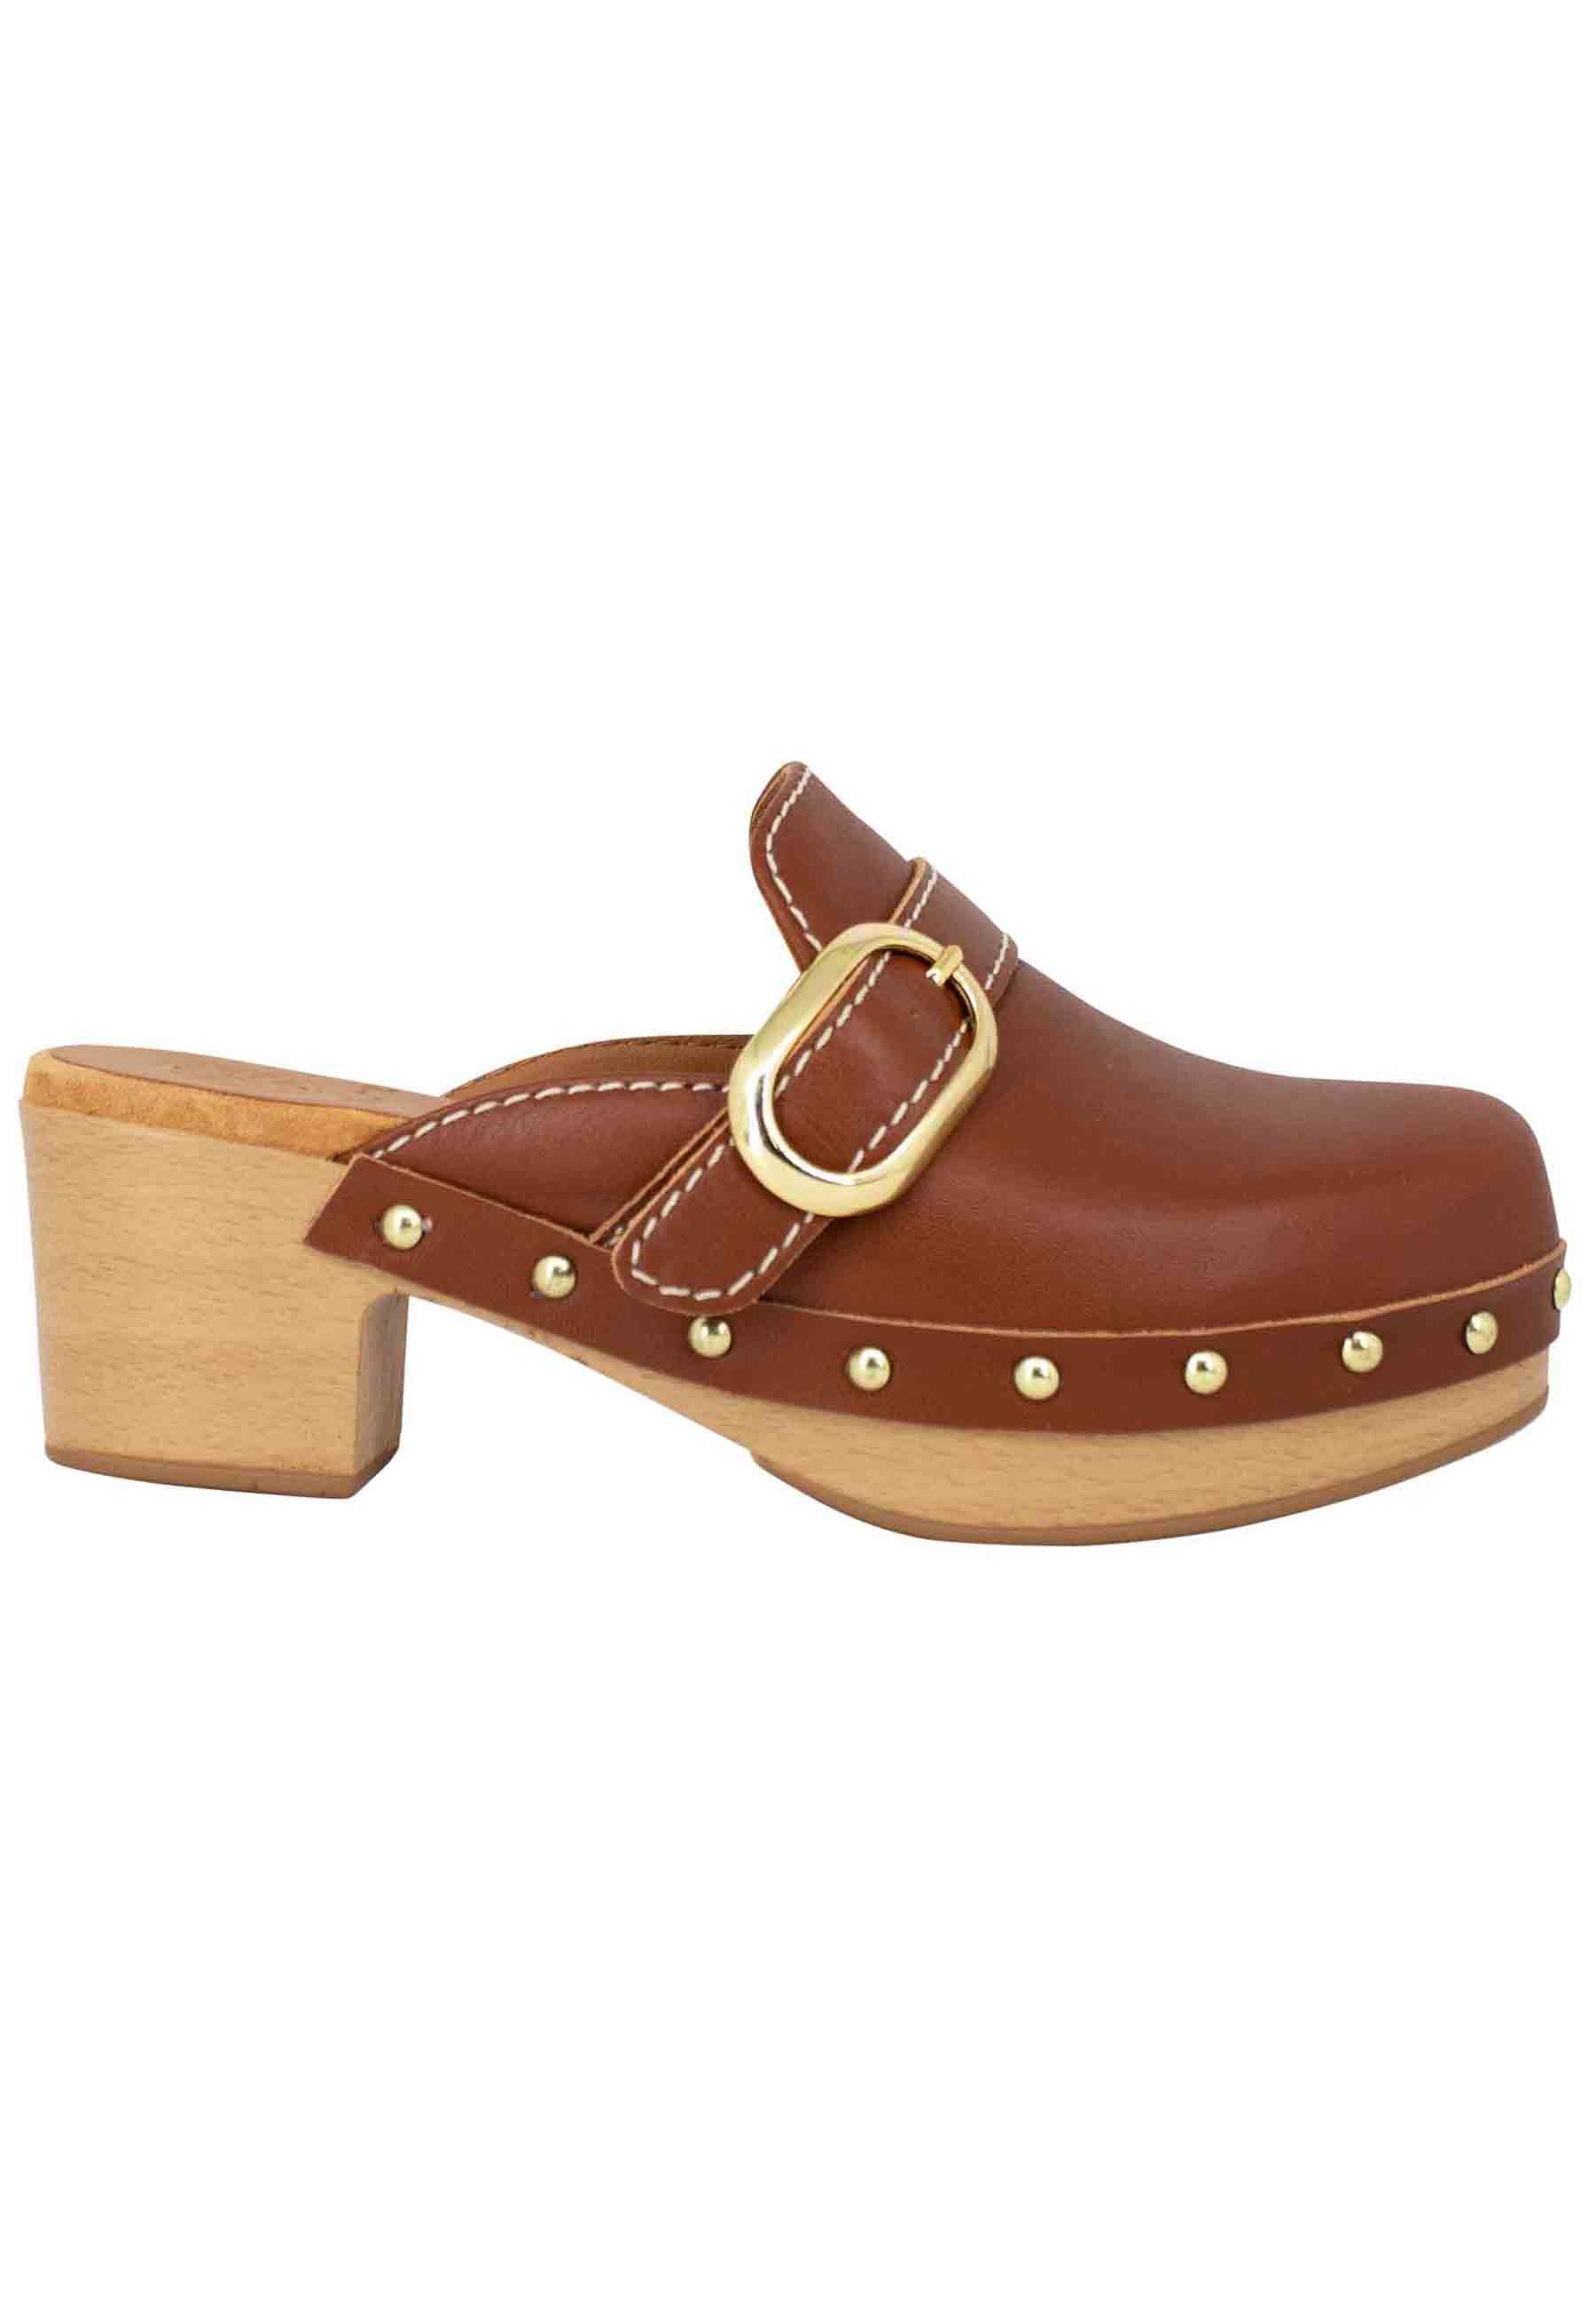 Women's clogs in tan leather with side buckle and closed toe